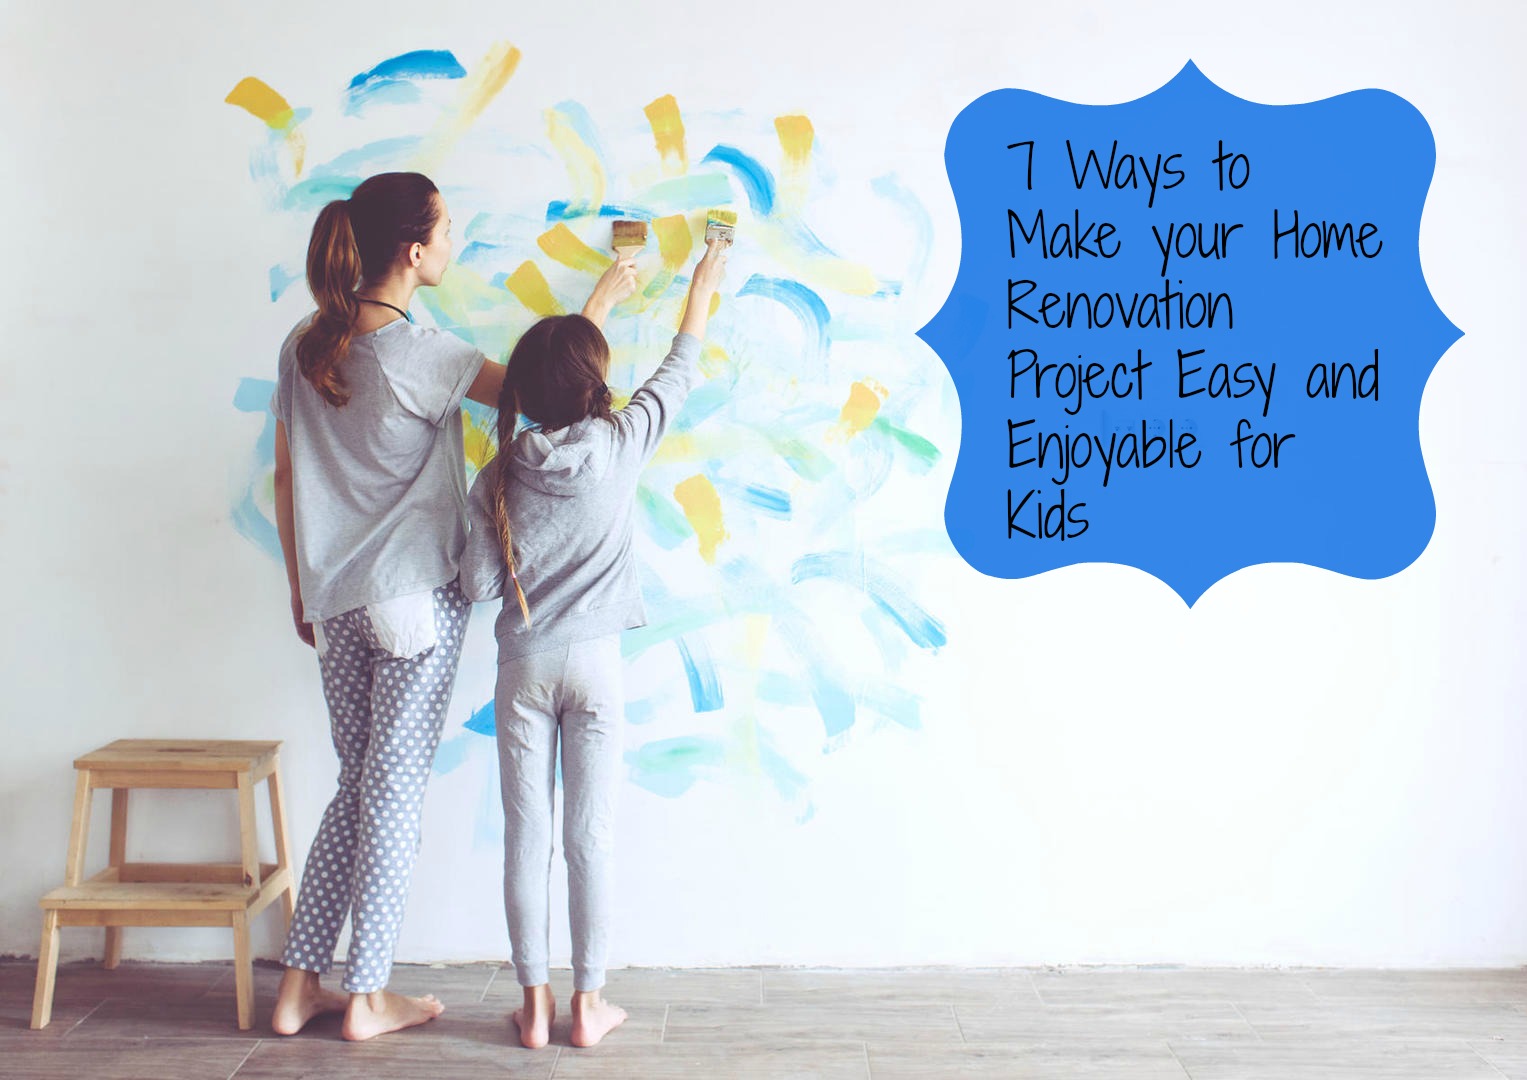 7 Ways to Make your Home Renovation Project Easy and Enjoyable for Kids